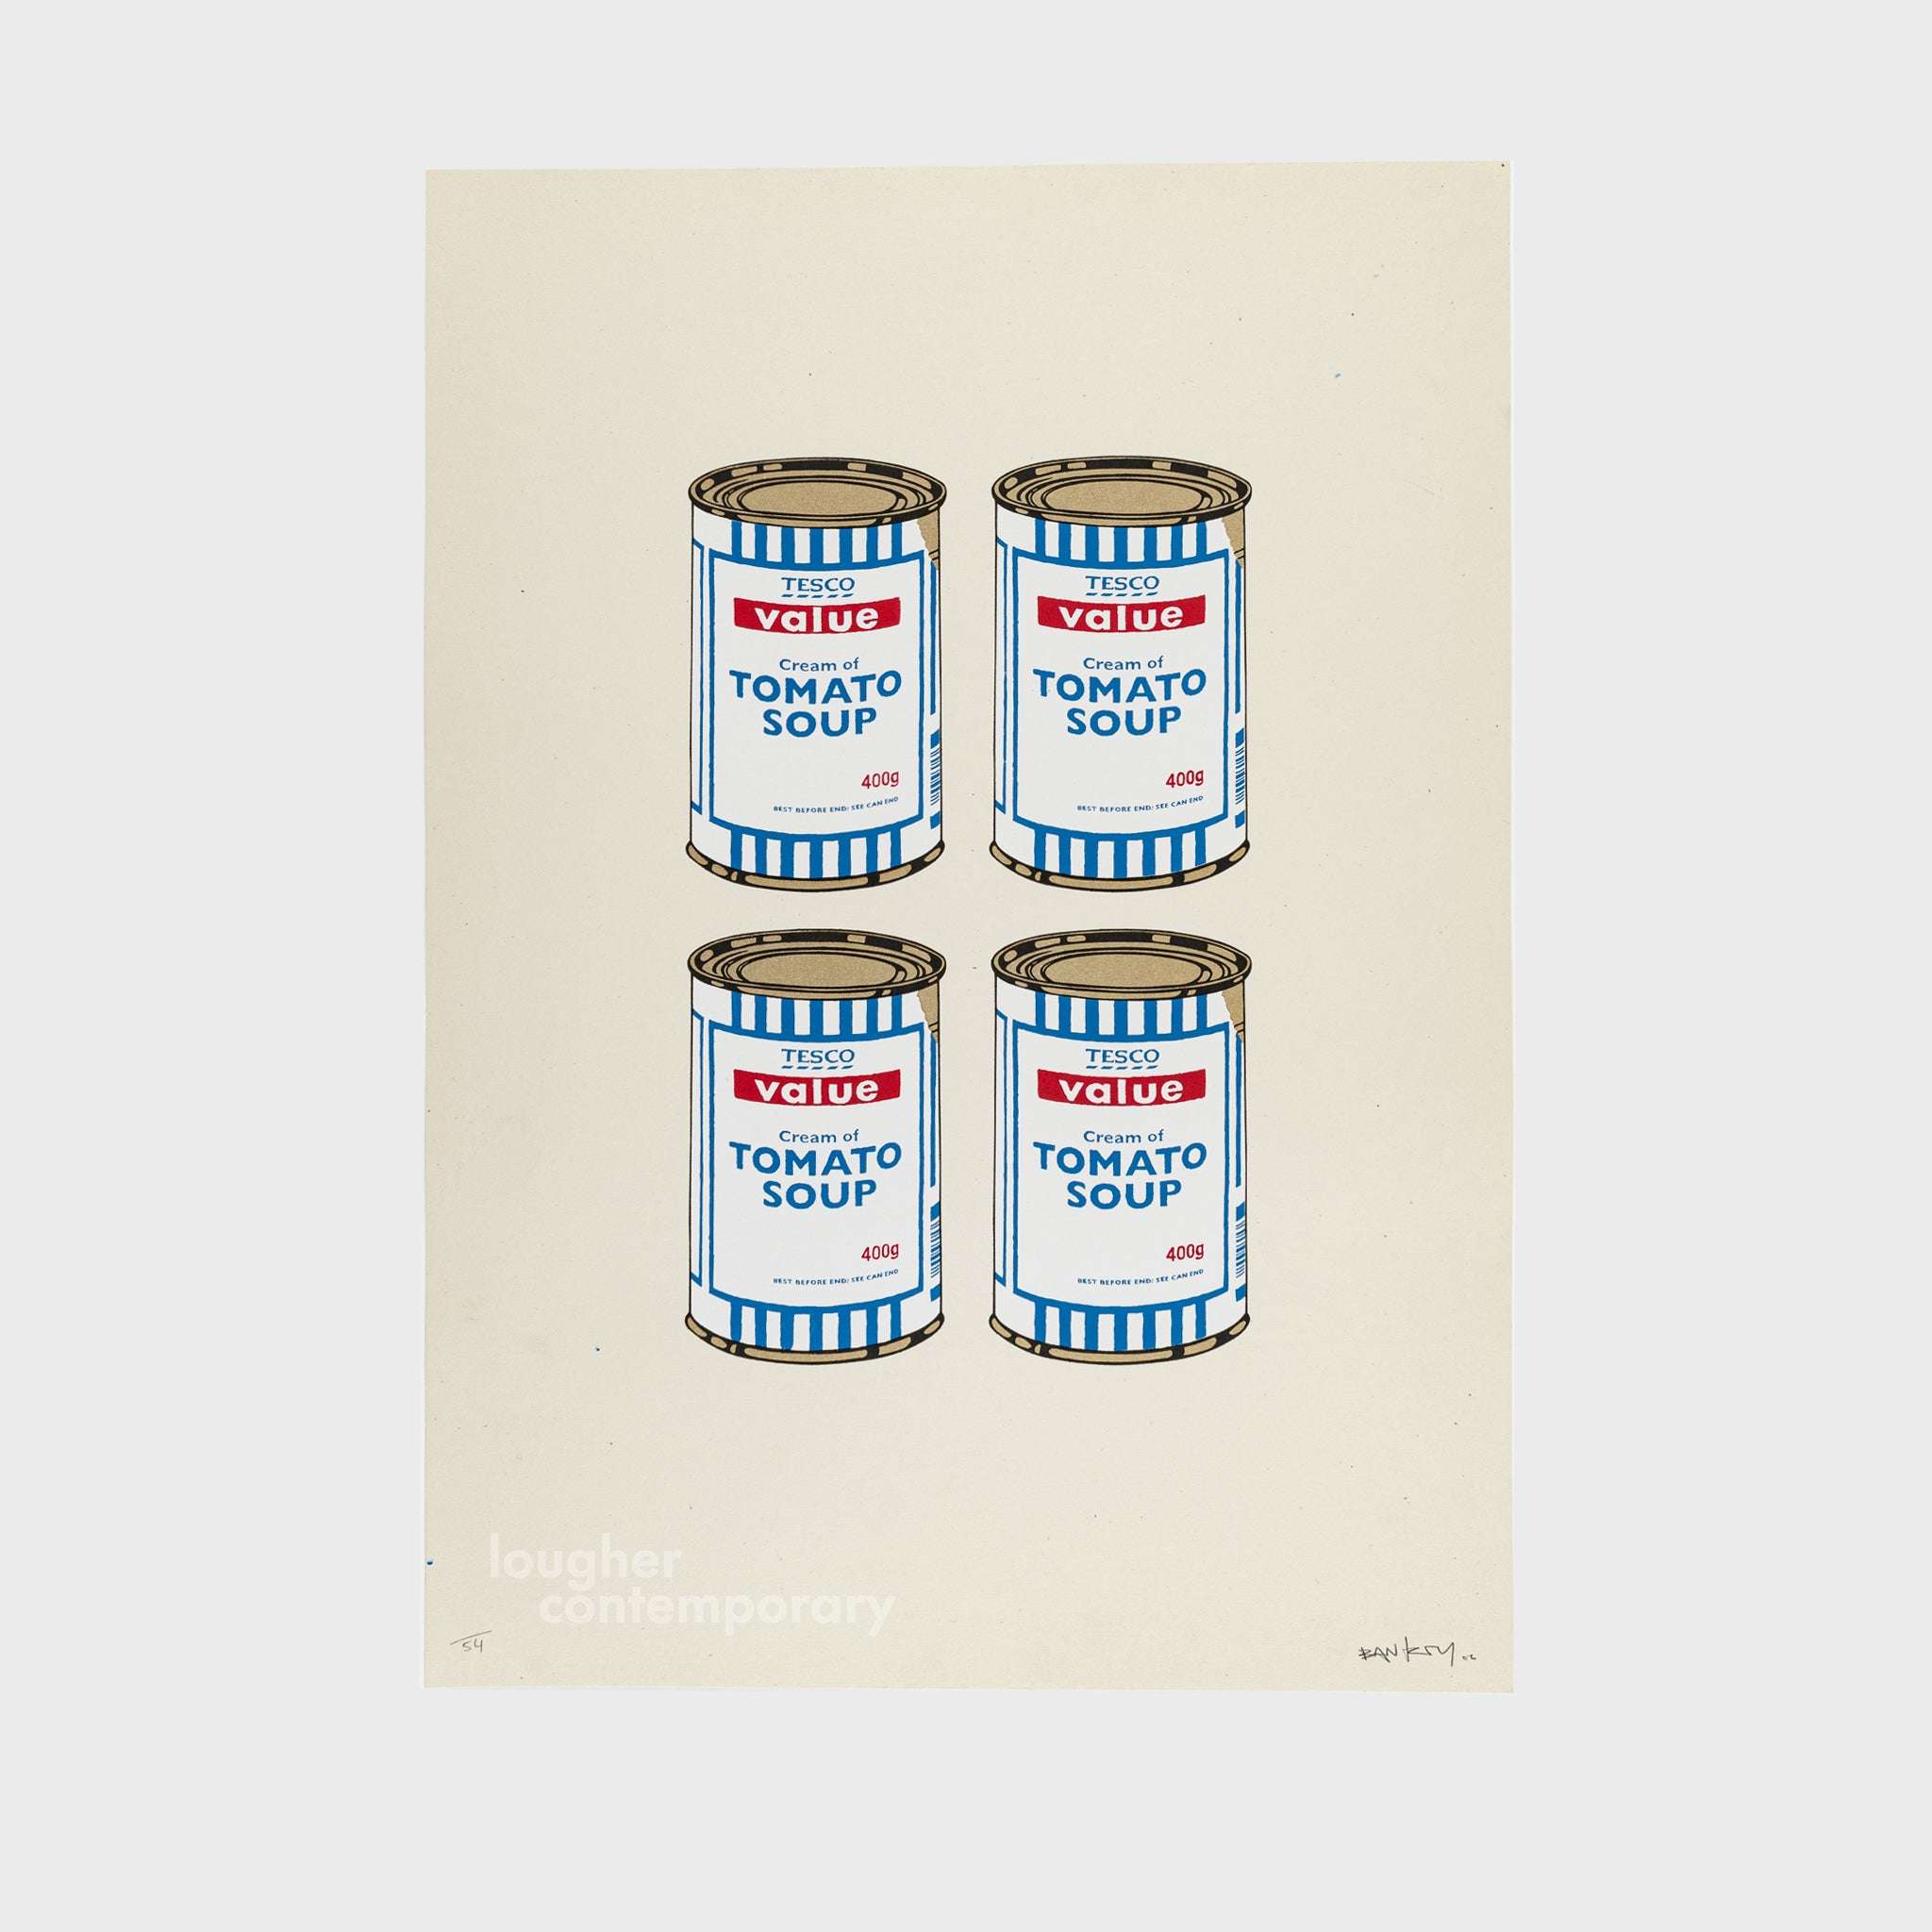 Banksy, Four Soup Cans - Gold on Cream, 2005 For Sale - Lougher Contemporary